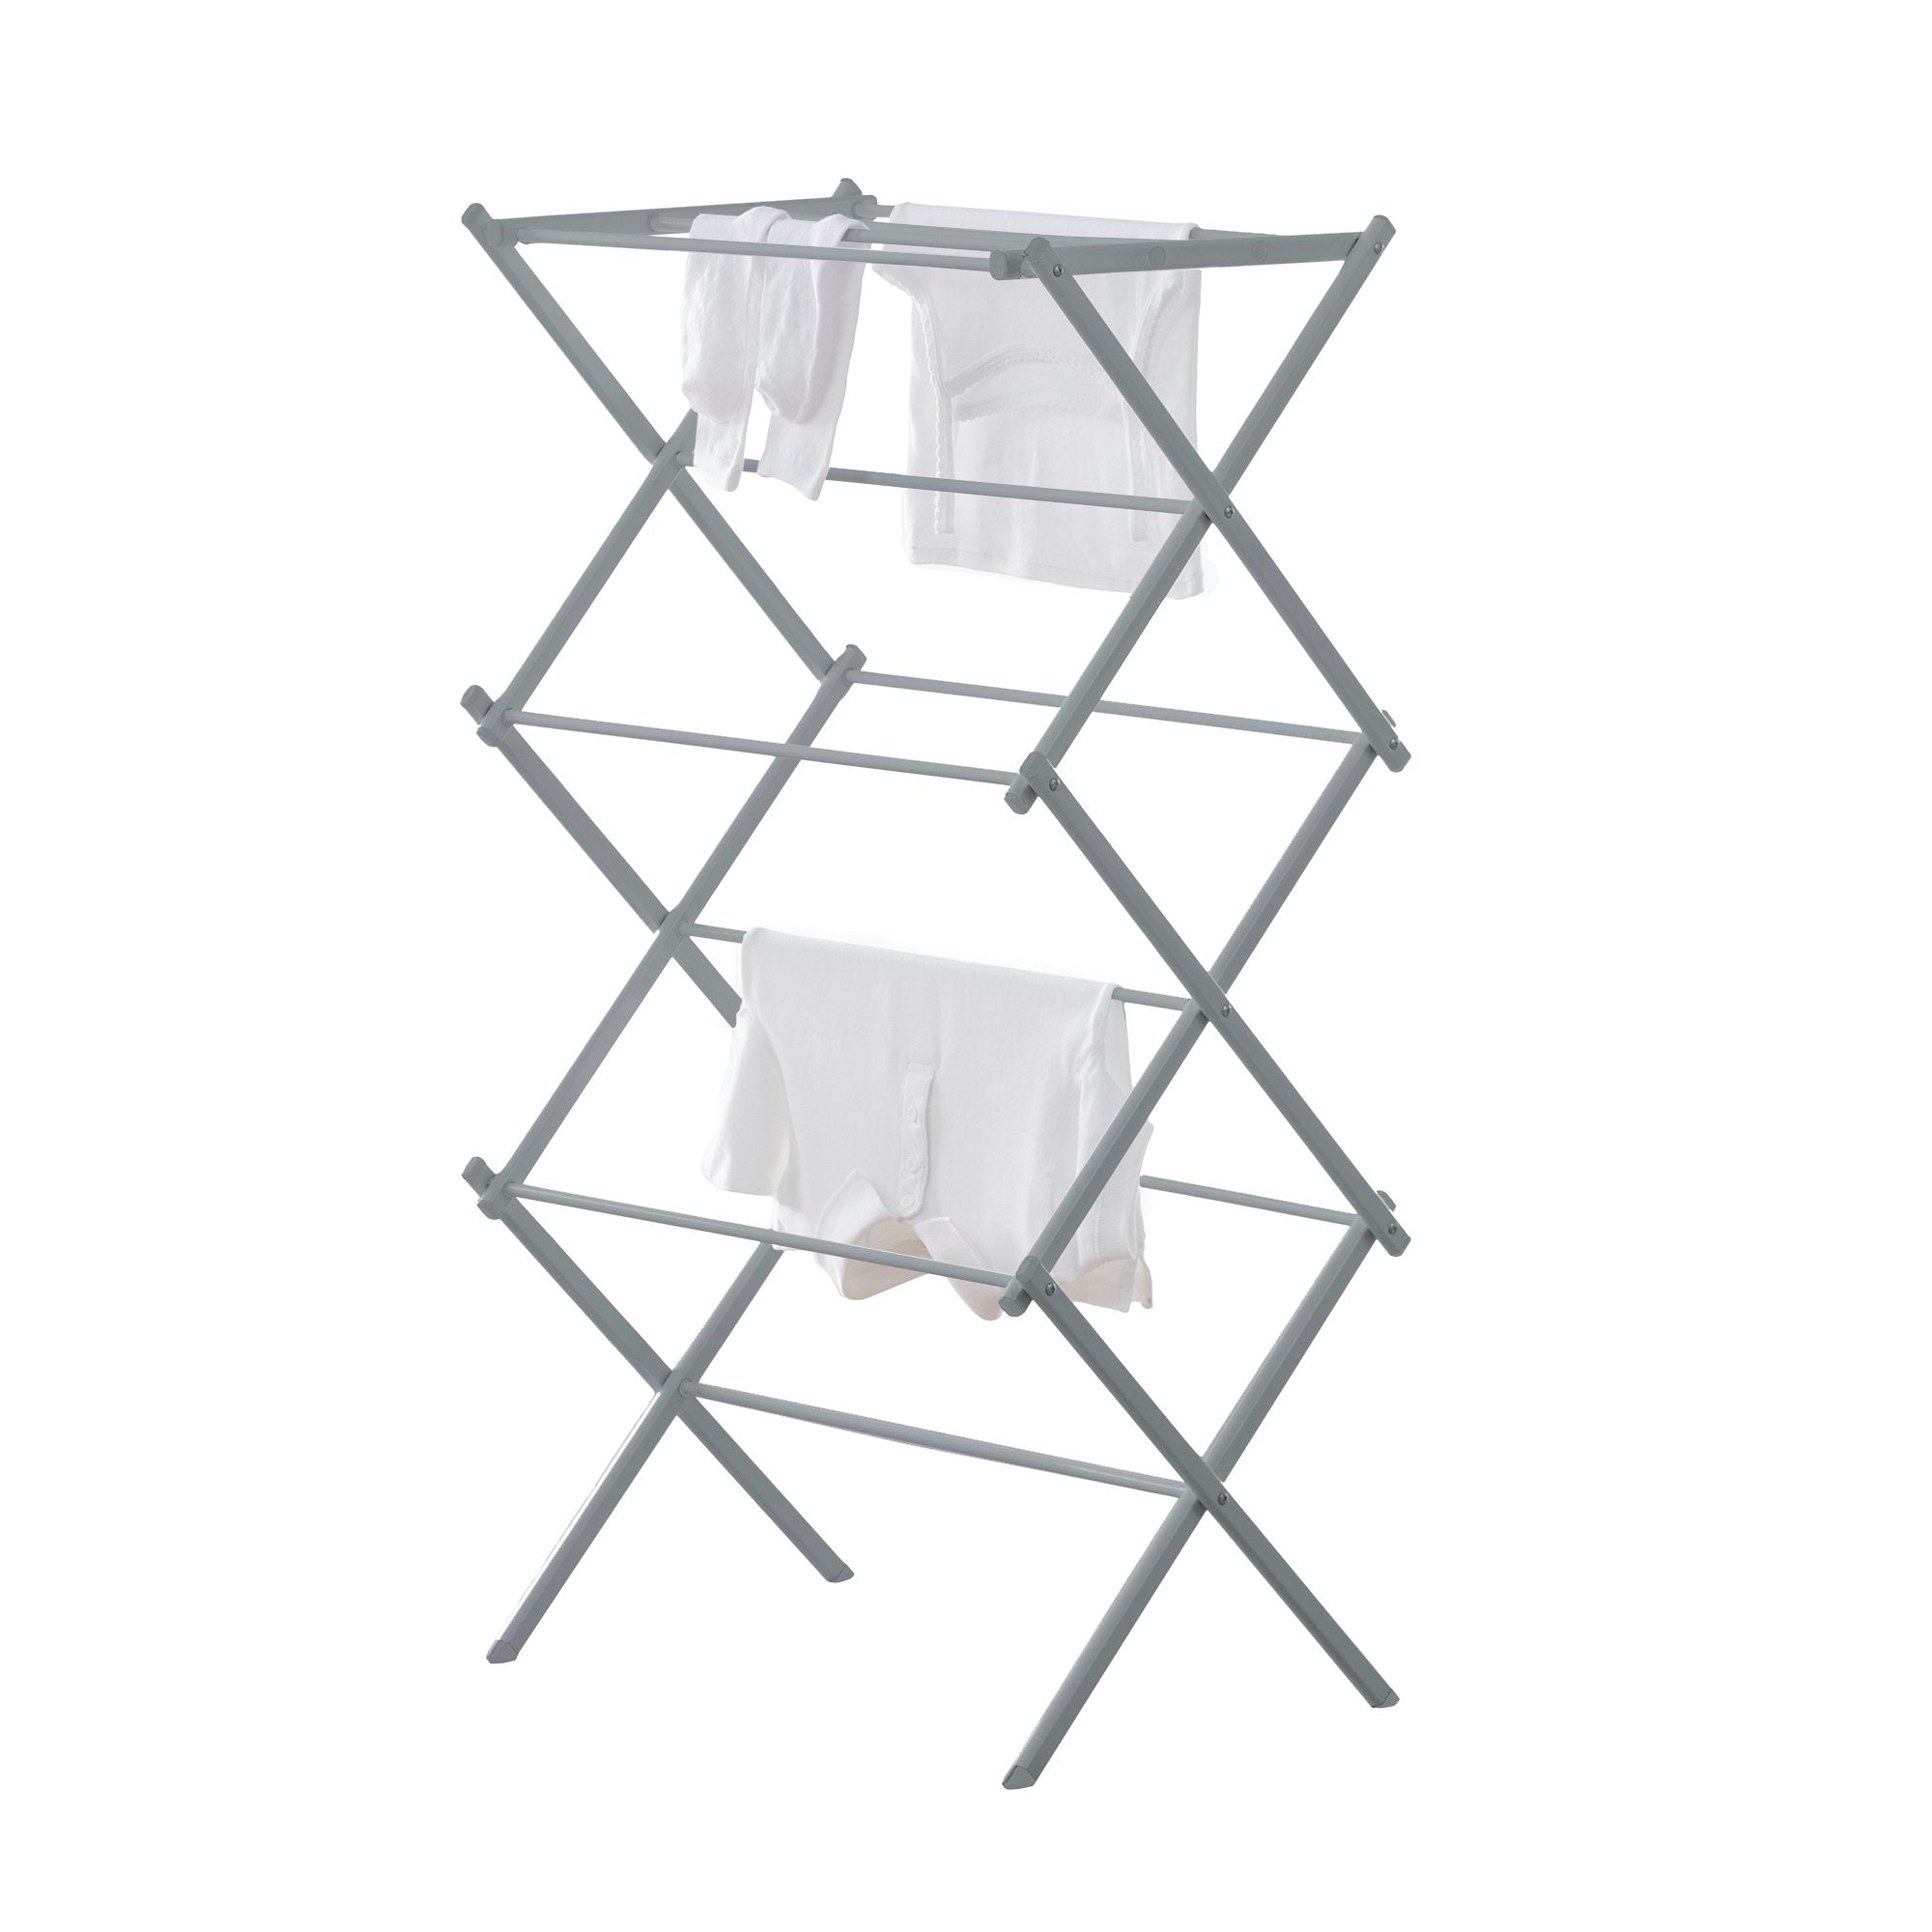 Compact Folding Laundry Drying Rack - Silver Metallic - Style 5529